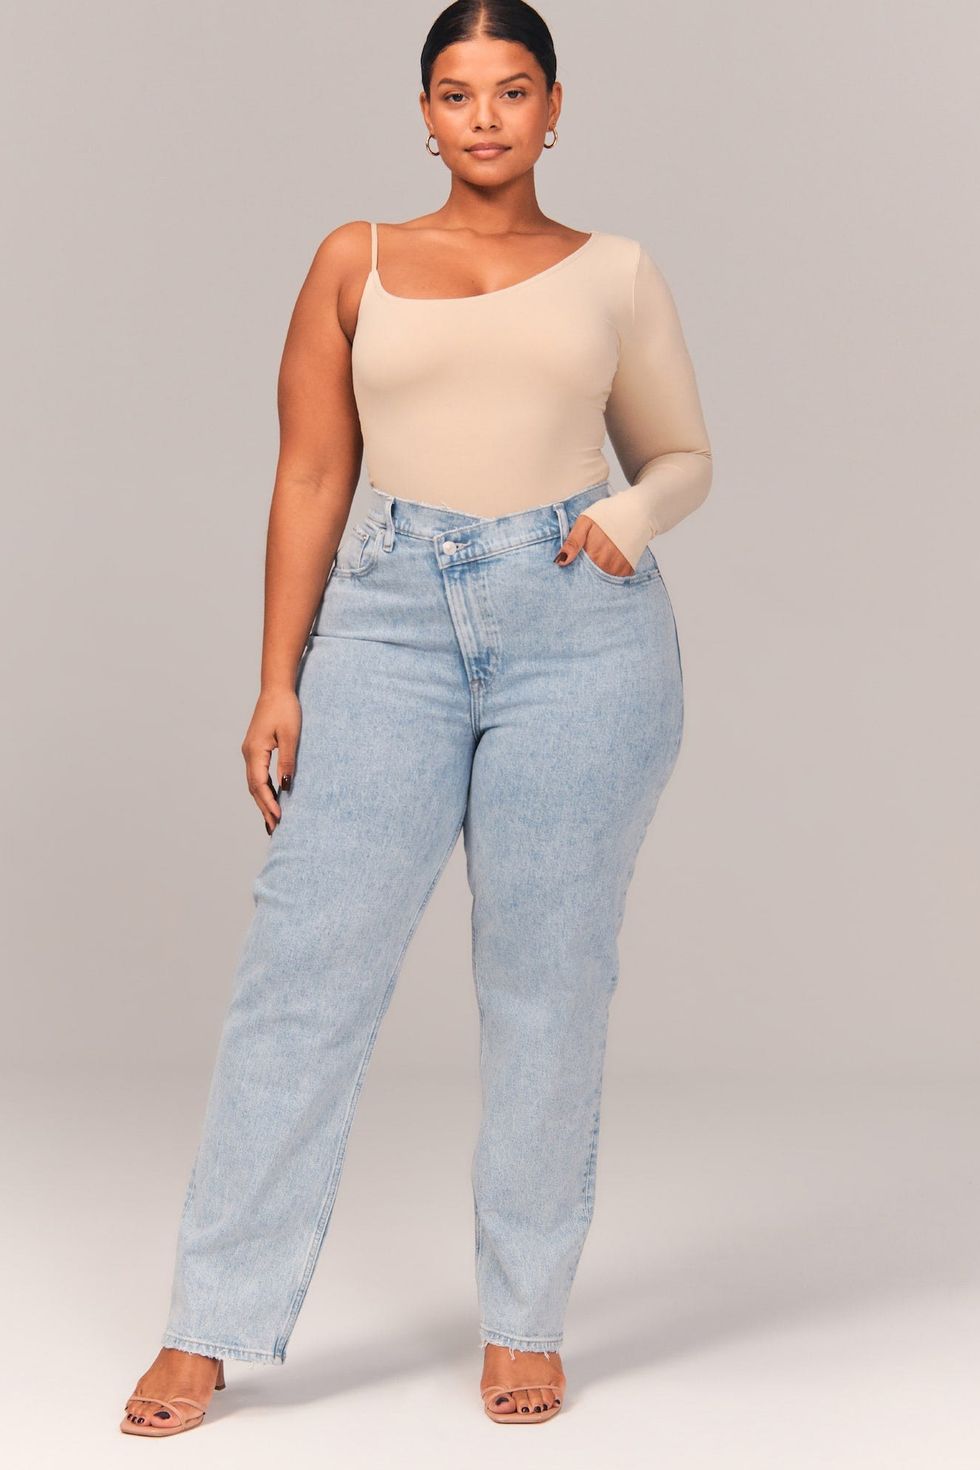 Midsize / plus size aesthetic mom jean outfit